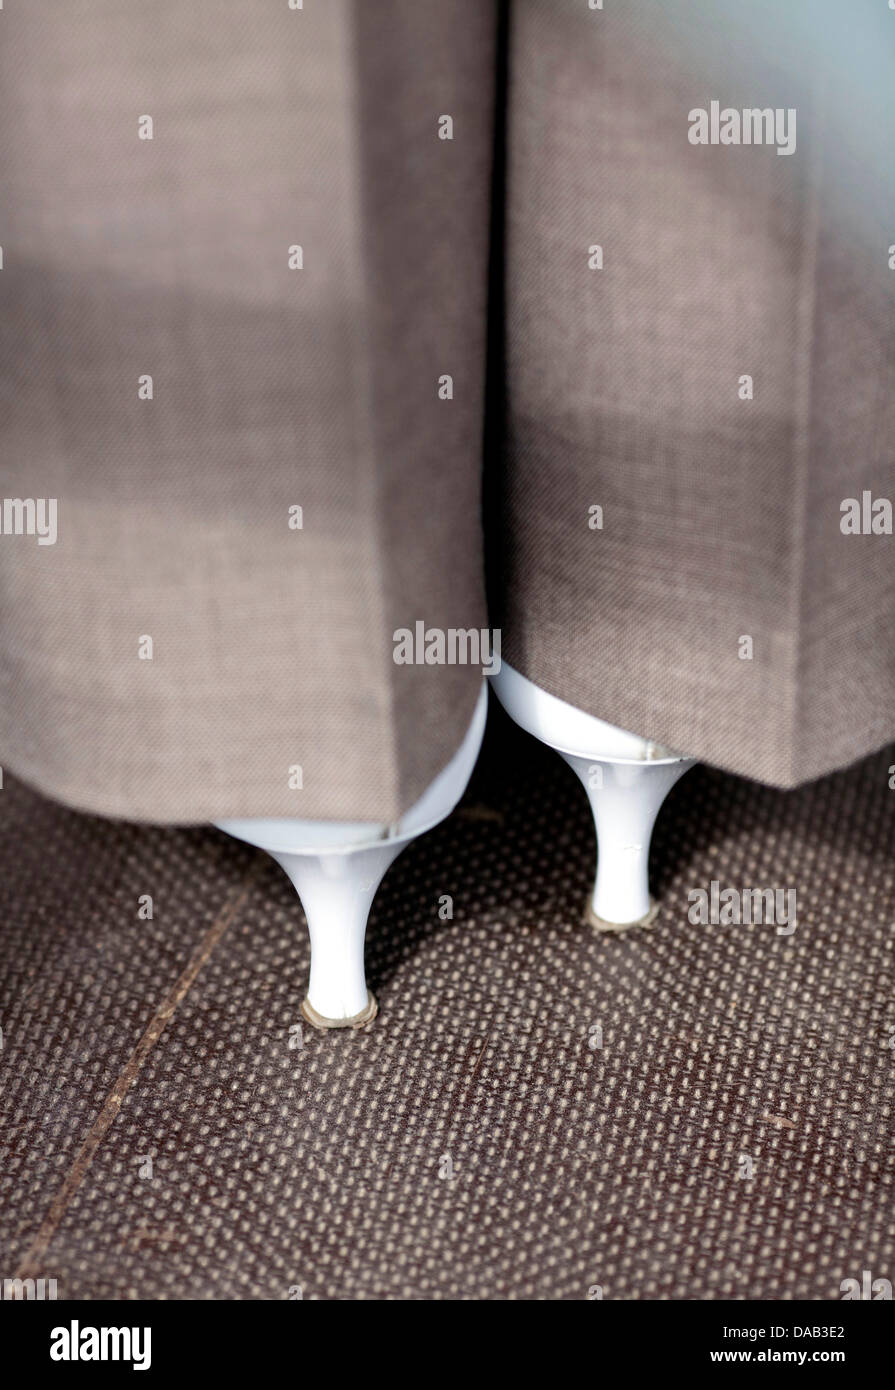 Thin white heels appear underneath the trouser legs of a business woman in Frankfurt Main, Germany, 6 September 2011. Photo: Frank Rumpenhorst Stock Photo